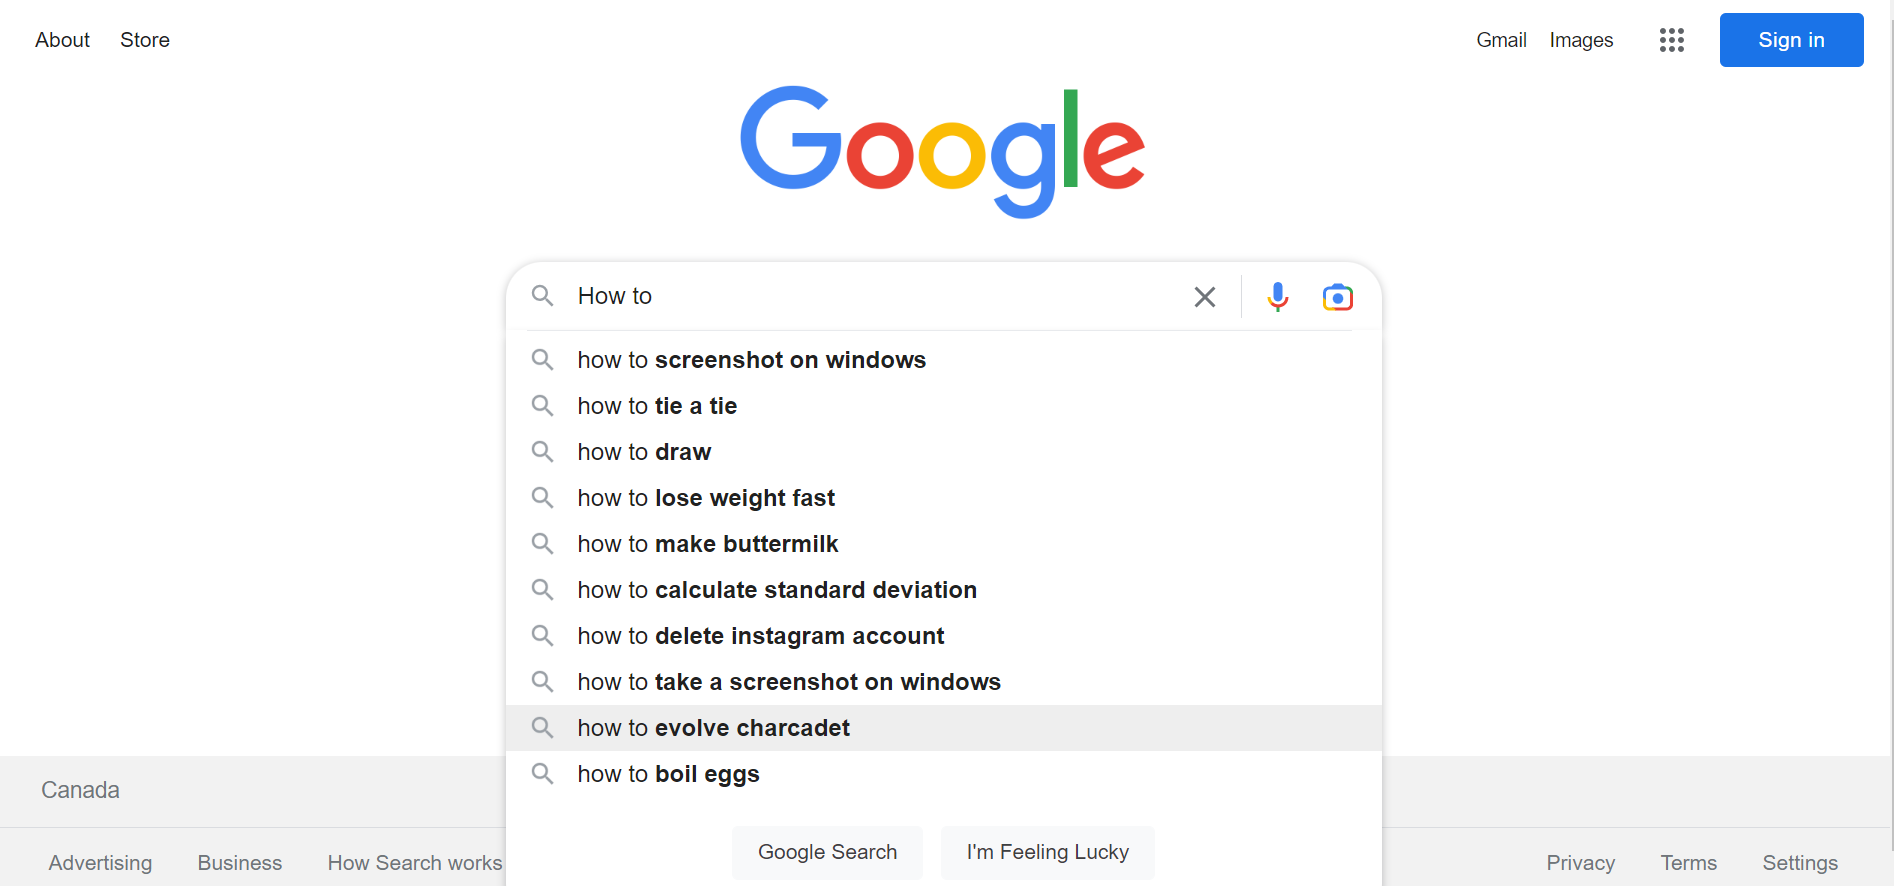 frequently asked questions populate on google search